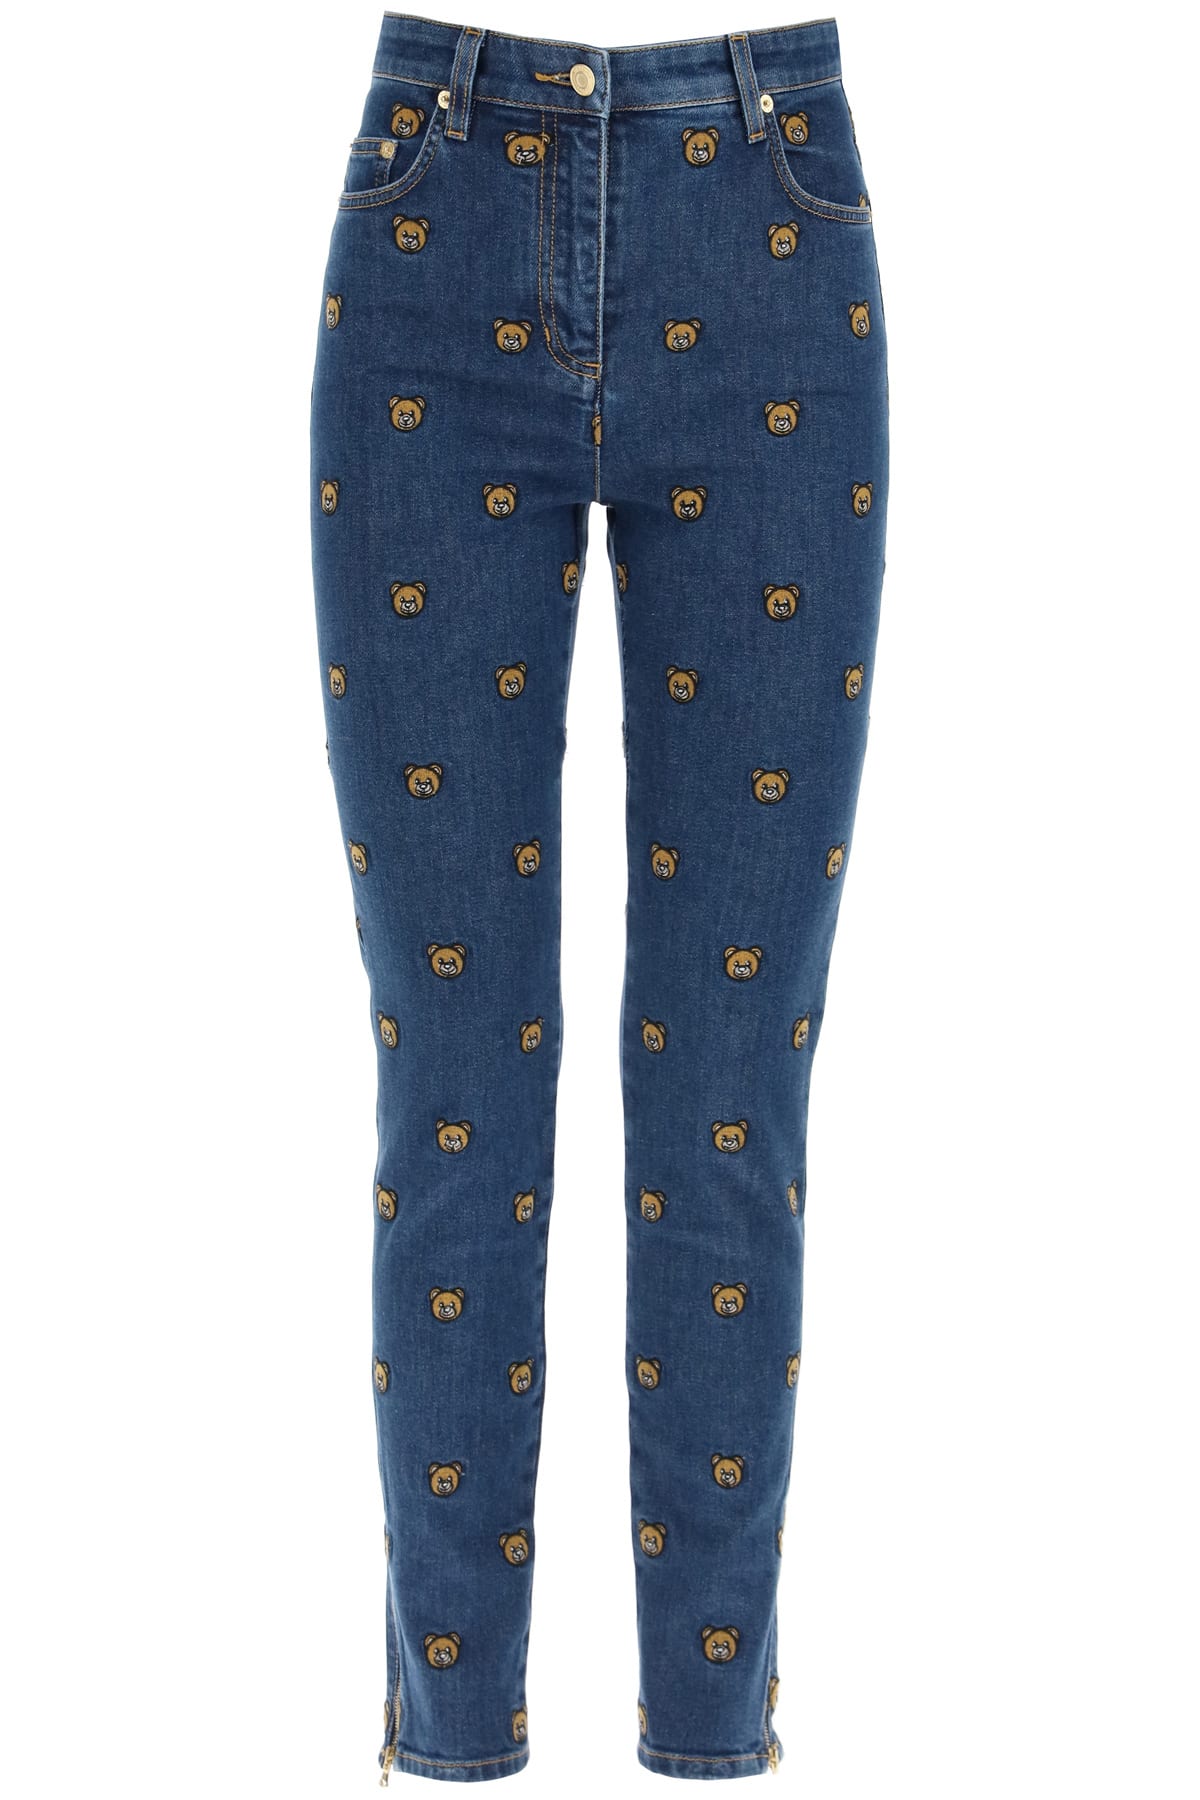 Moschino All-over Teddy Bear Embroidered Denim Jeans